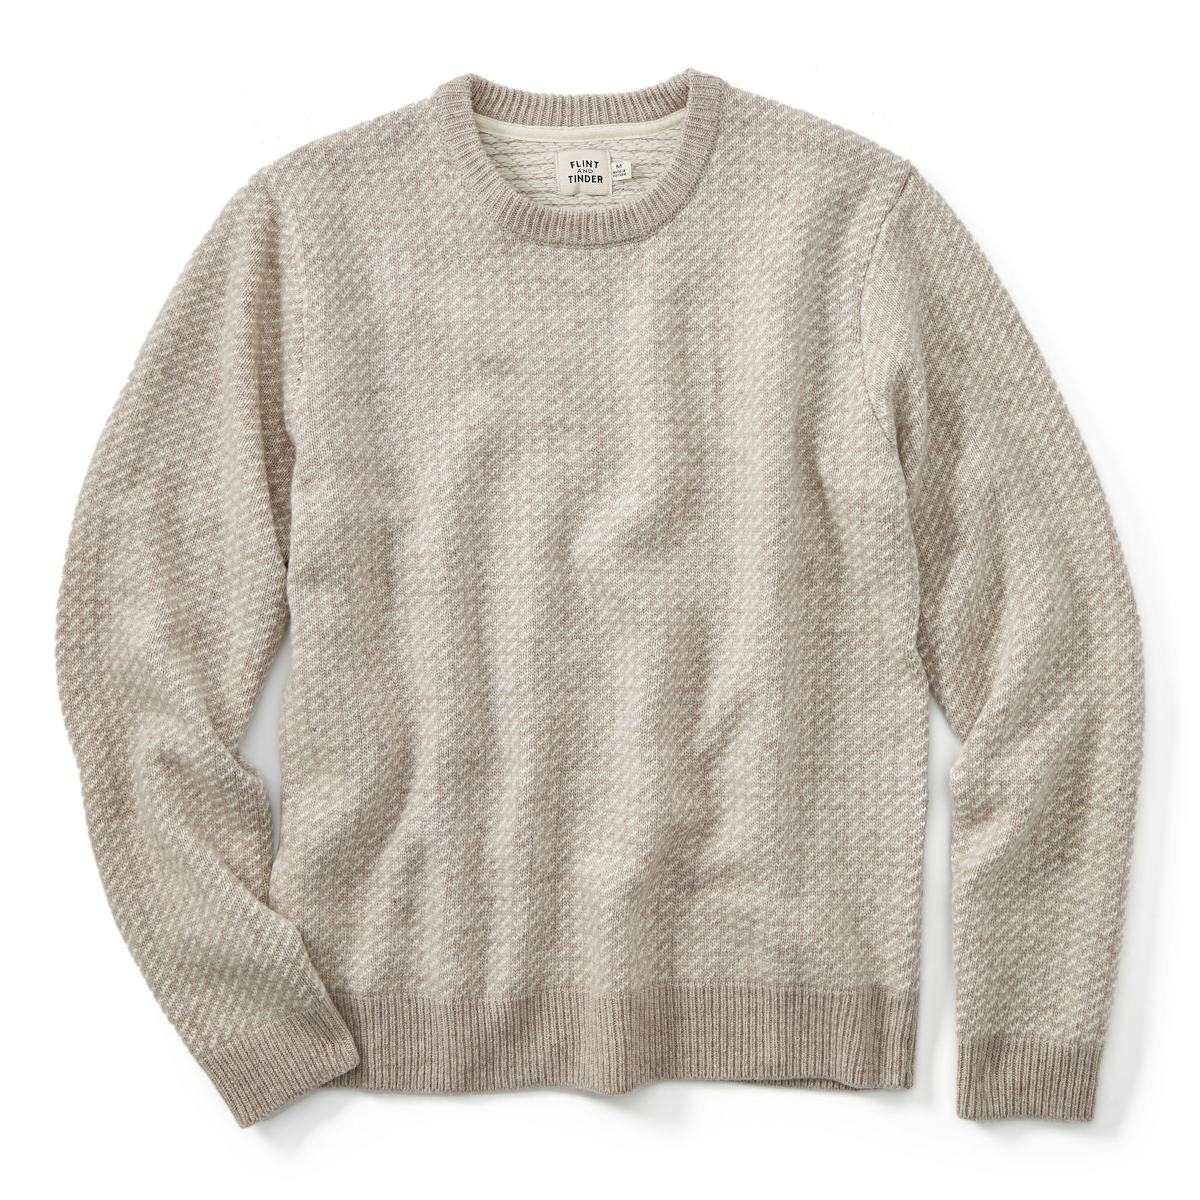 Flint and Tinder Nordic Jacquard Crew Sweater - Rugby Tan/Lily White ...